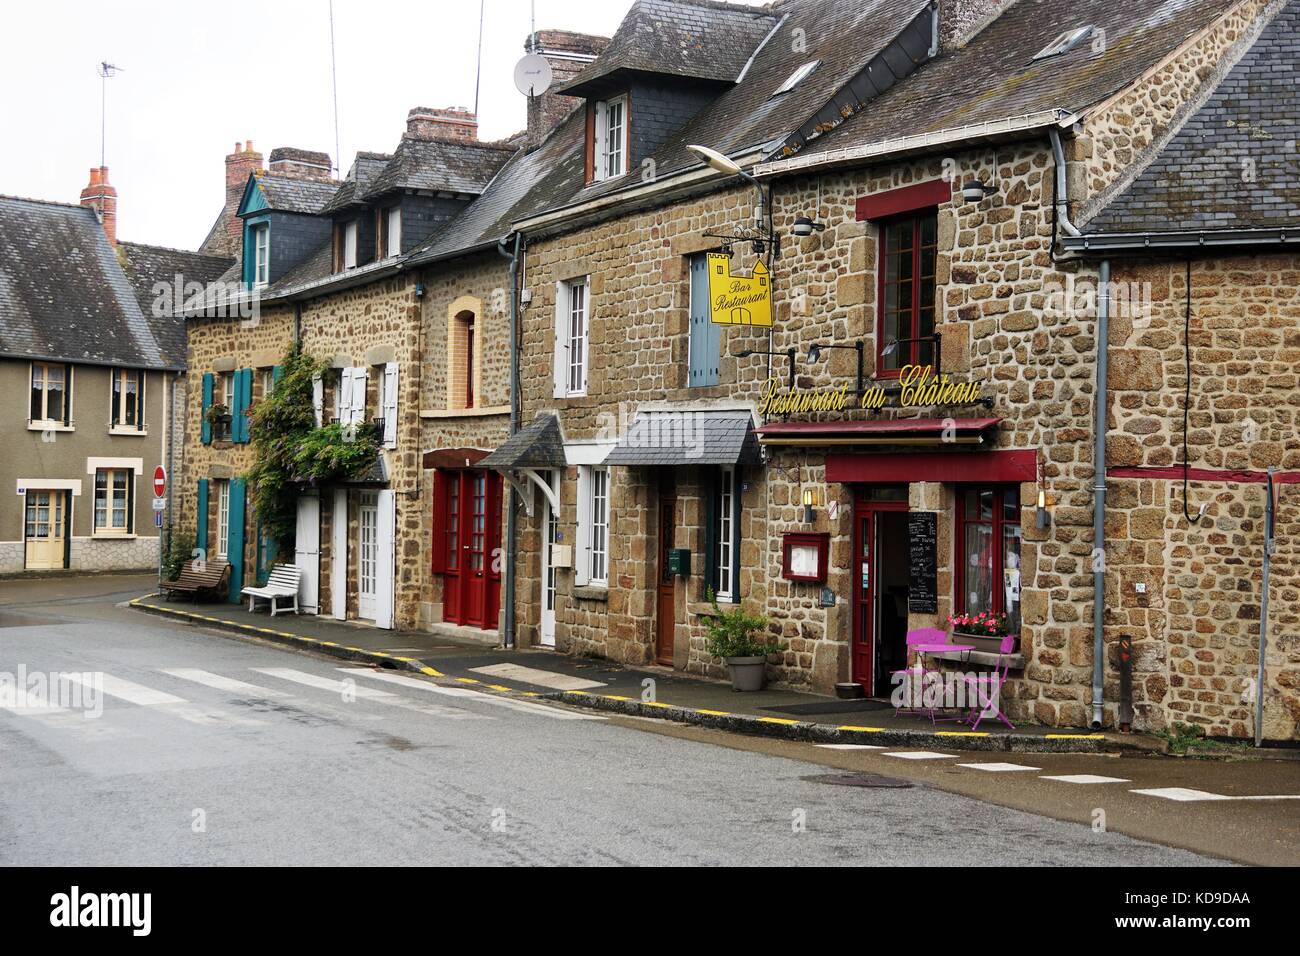 Street With Brick Shops And Buildings Against Grey Sky In Normandy, France Stock Photo